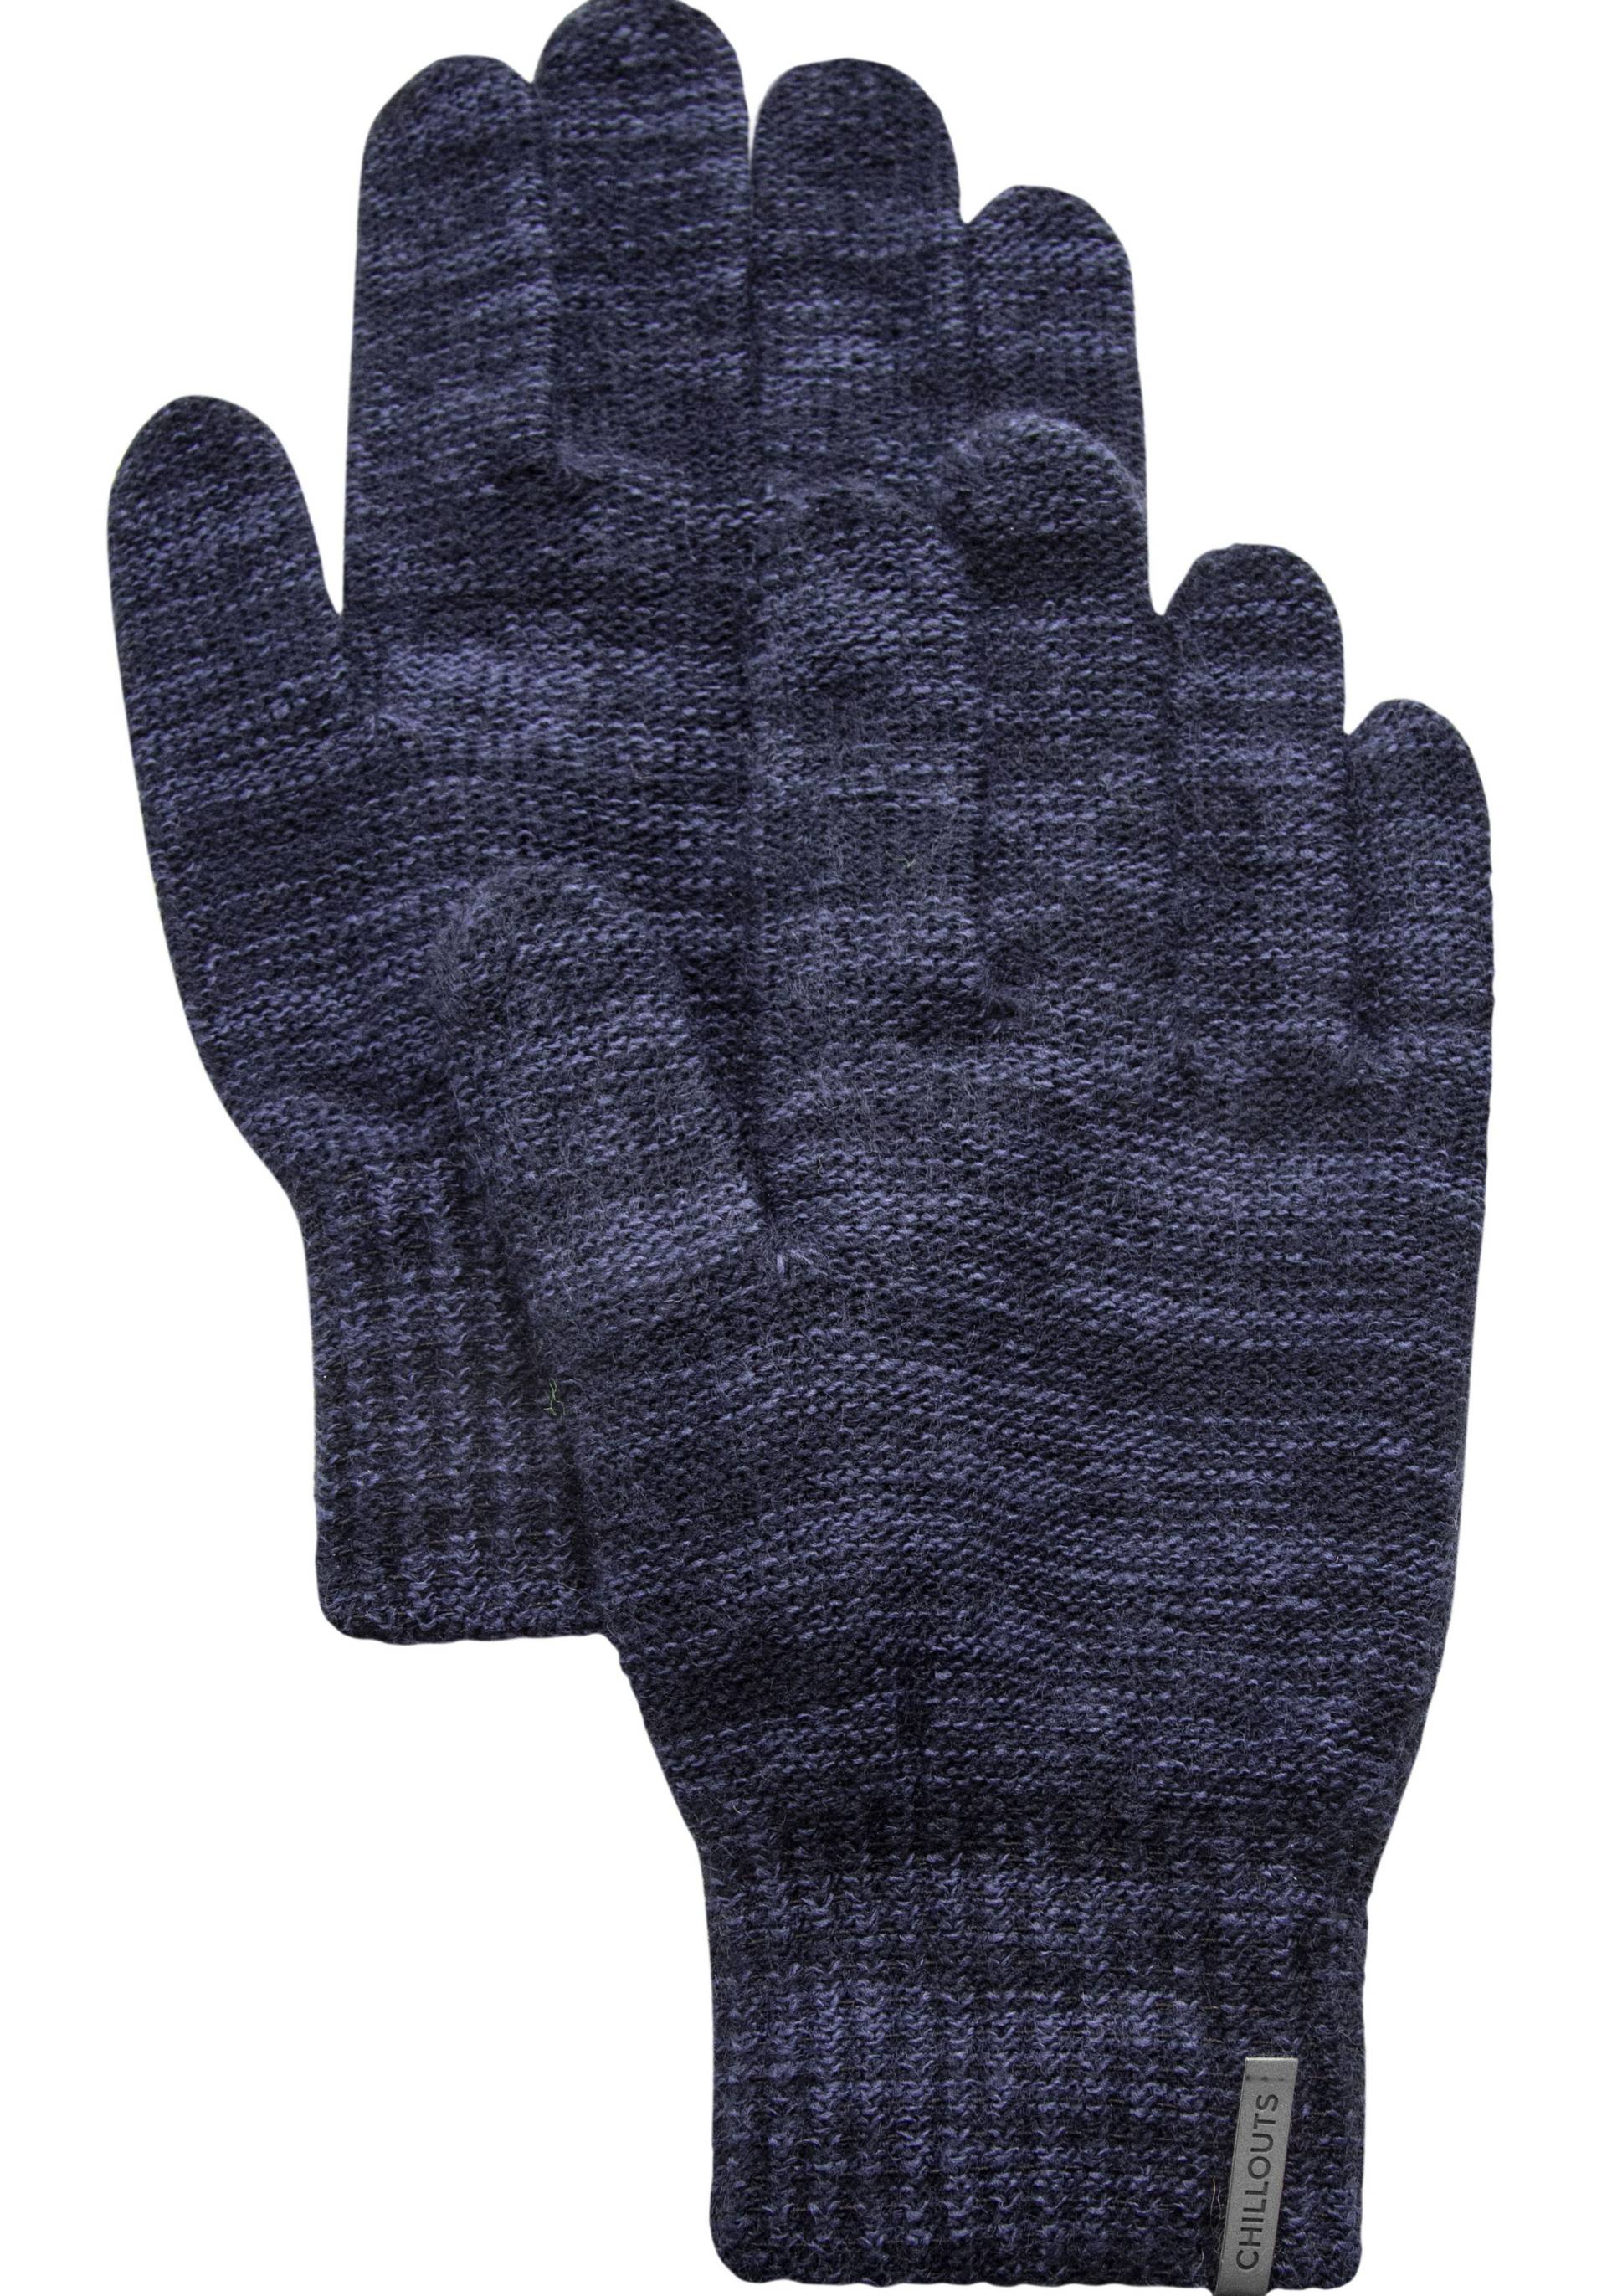 chillouts Strickhandschuhe »Perry Glove«, (2 St.) von chillouts